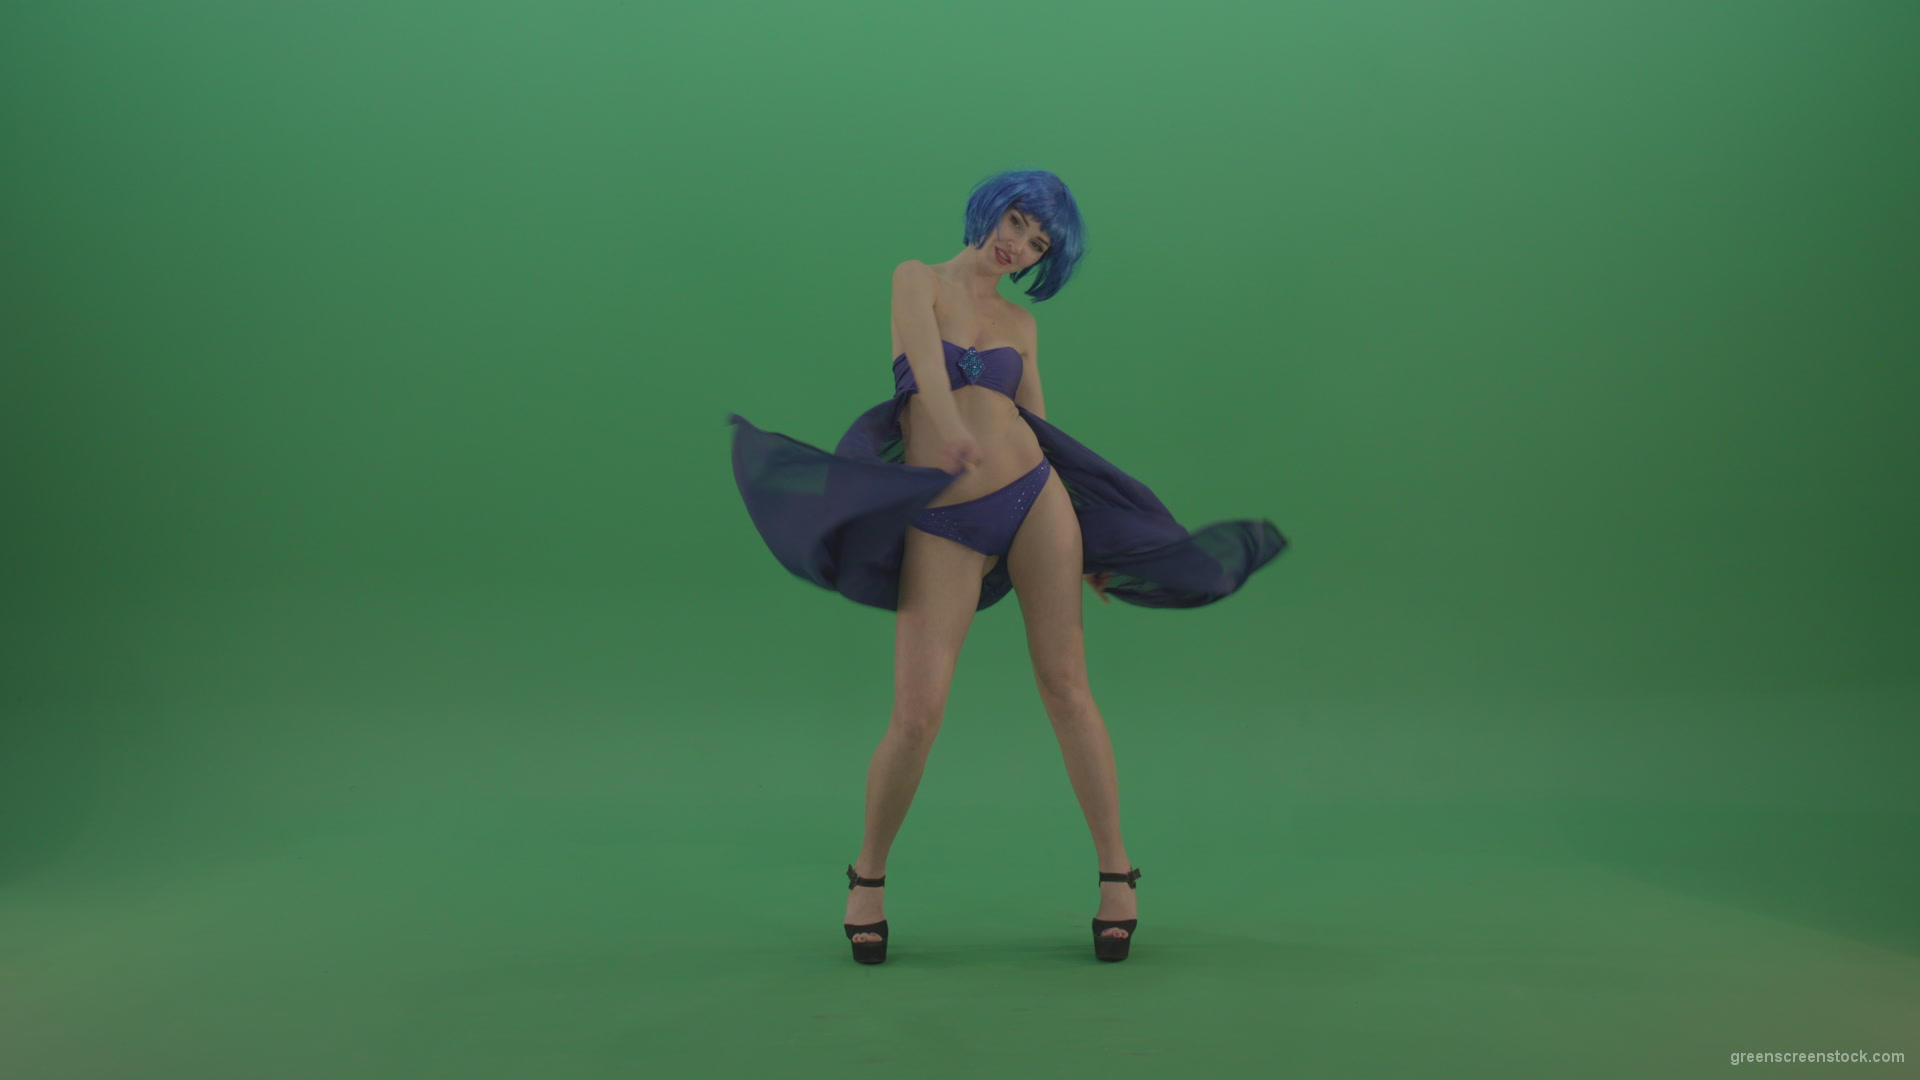 Full-size-erotic-young-girl-dancing-go-go-with-blue-dress-curtain-on-green-screen-1_002 Green Screen Stock